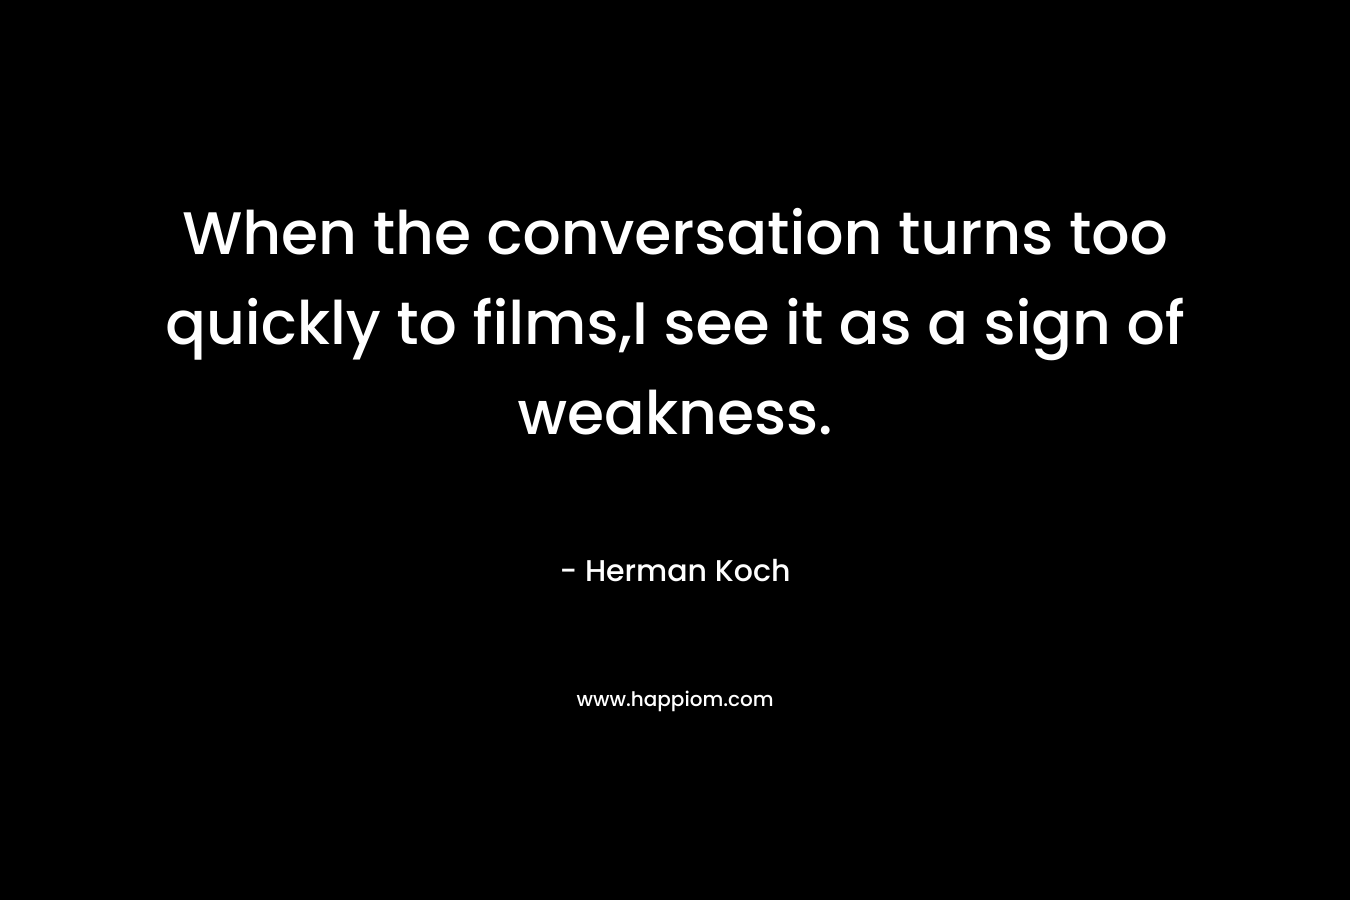 When the conversation turns too quickly to films,I see it as a sign of weakness.